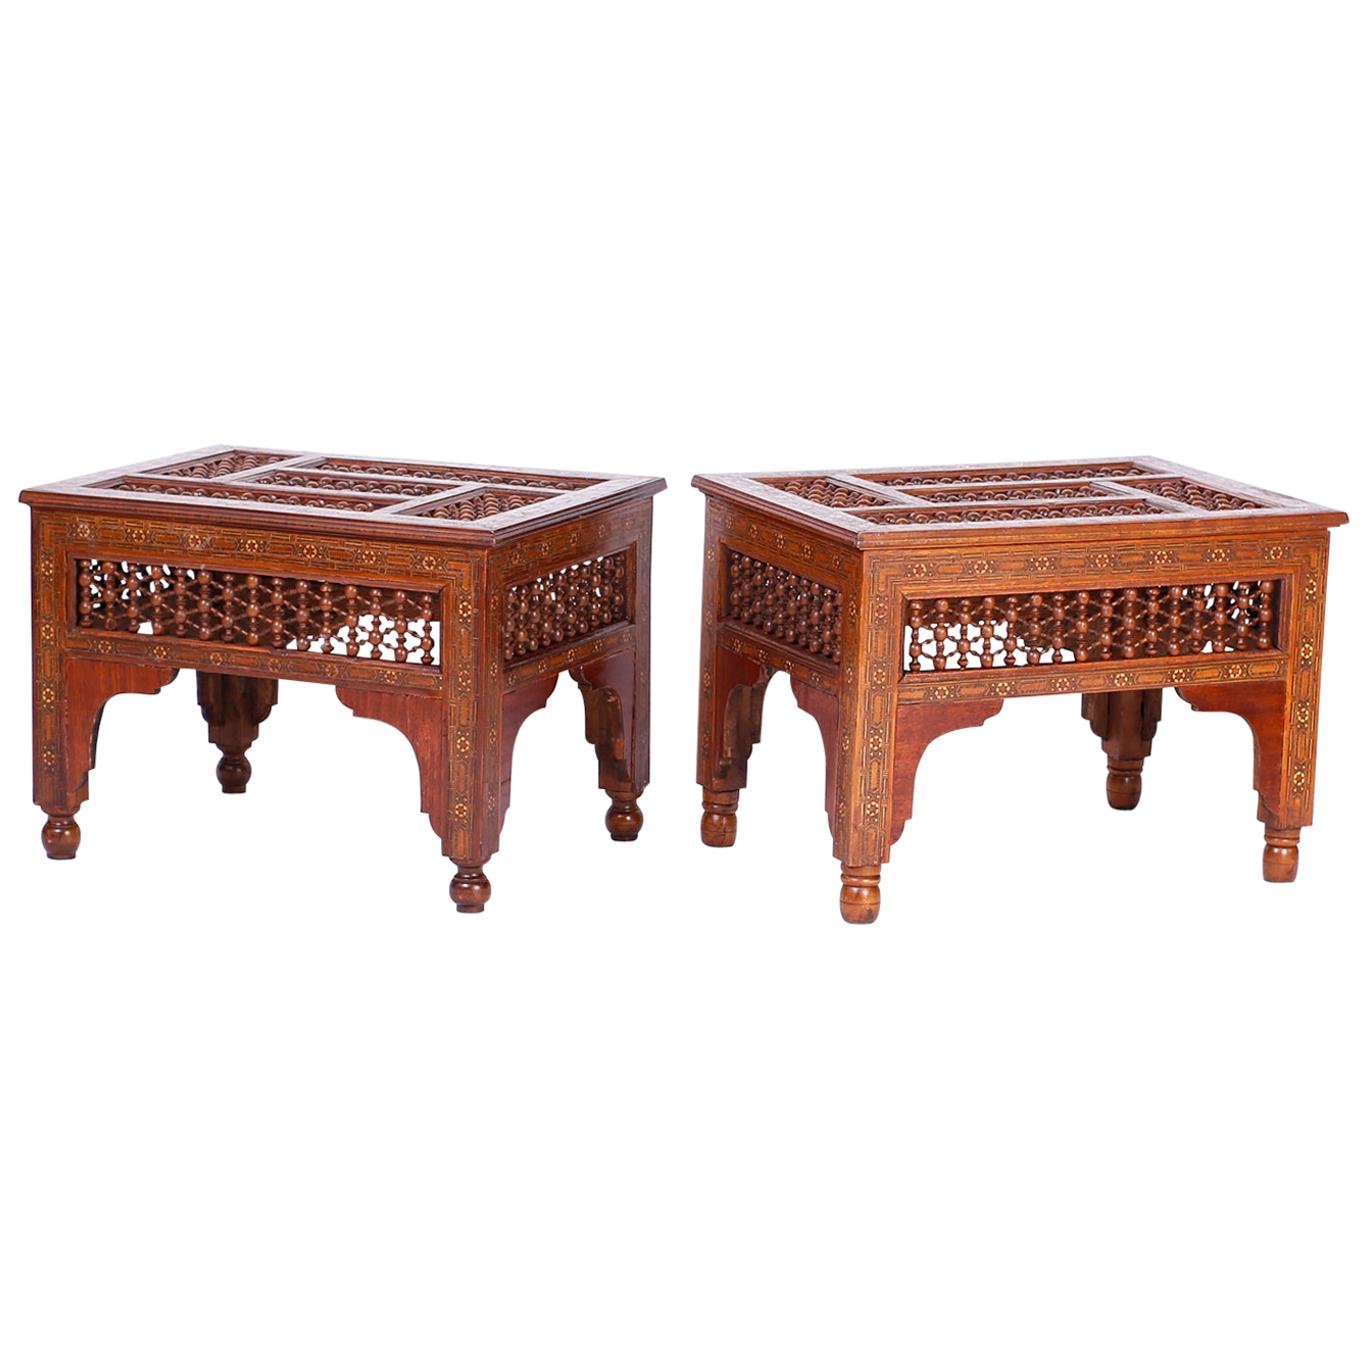 Pair of Antique Moroccan Inlaid Stands